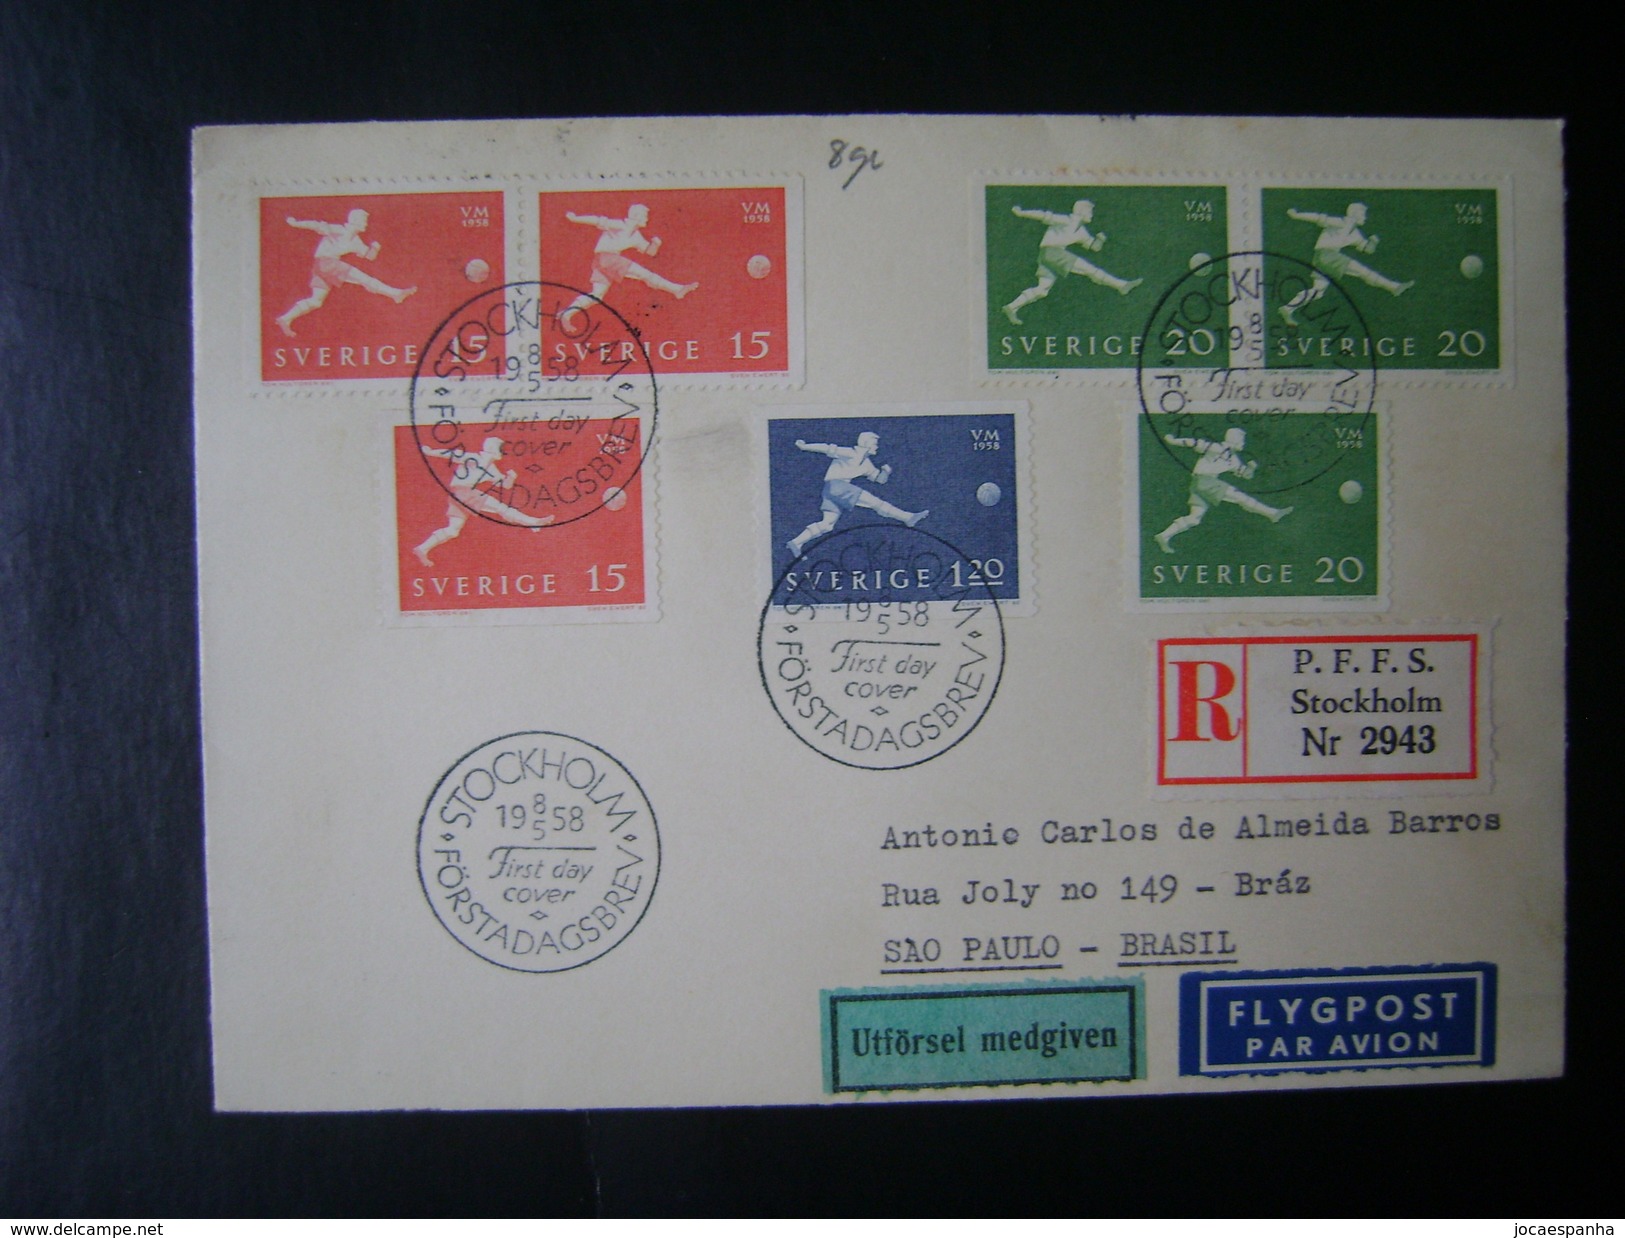 FOOTBALL WORLD CUP SWEDEN 1958 - LETTER SHIPPED FROM STOCKHOLM TO BRAZIL WITH SERIES AND STAMP FDC - 1958 – Suecia